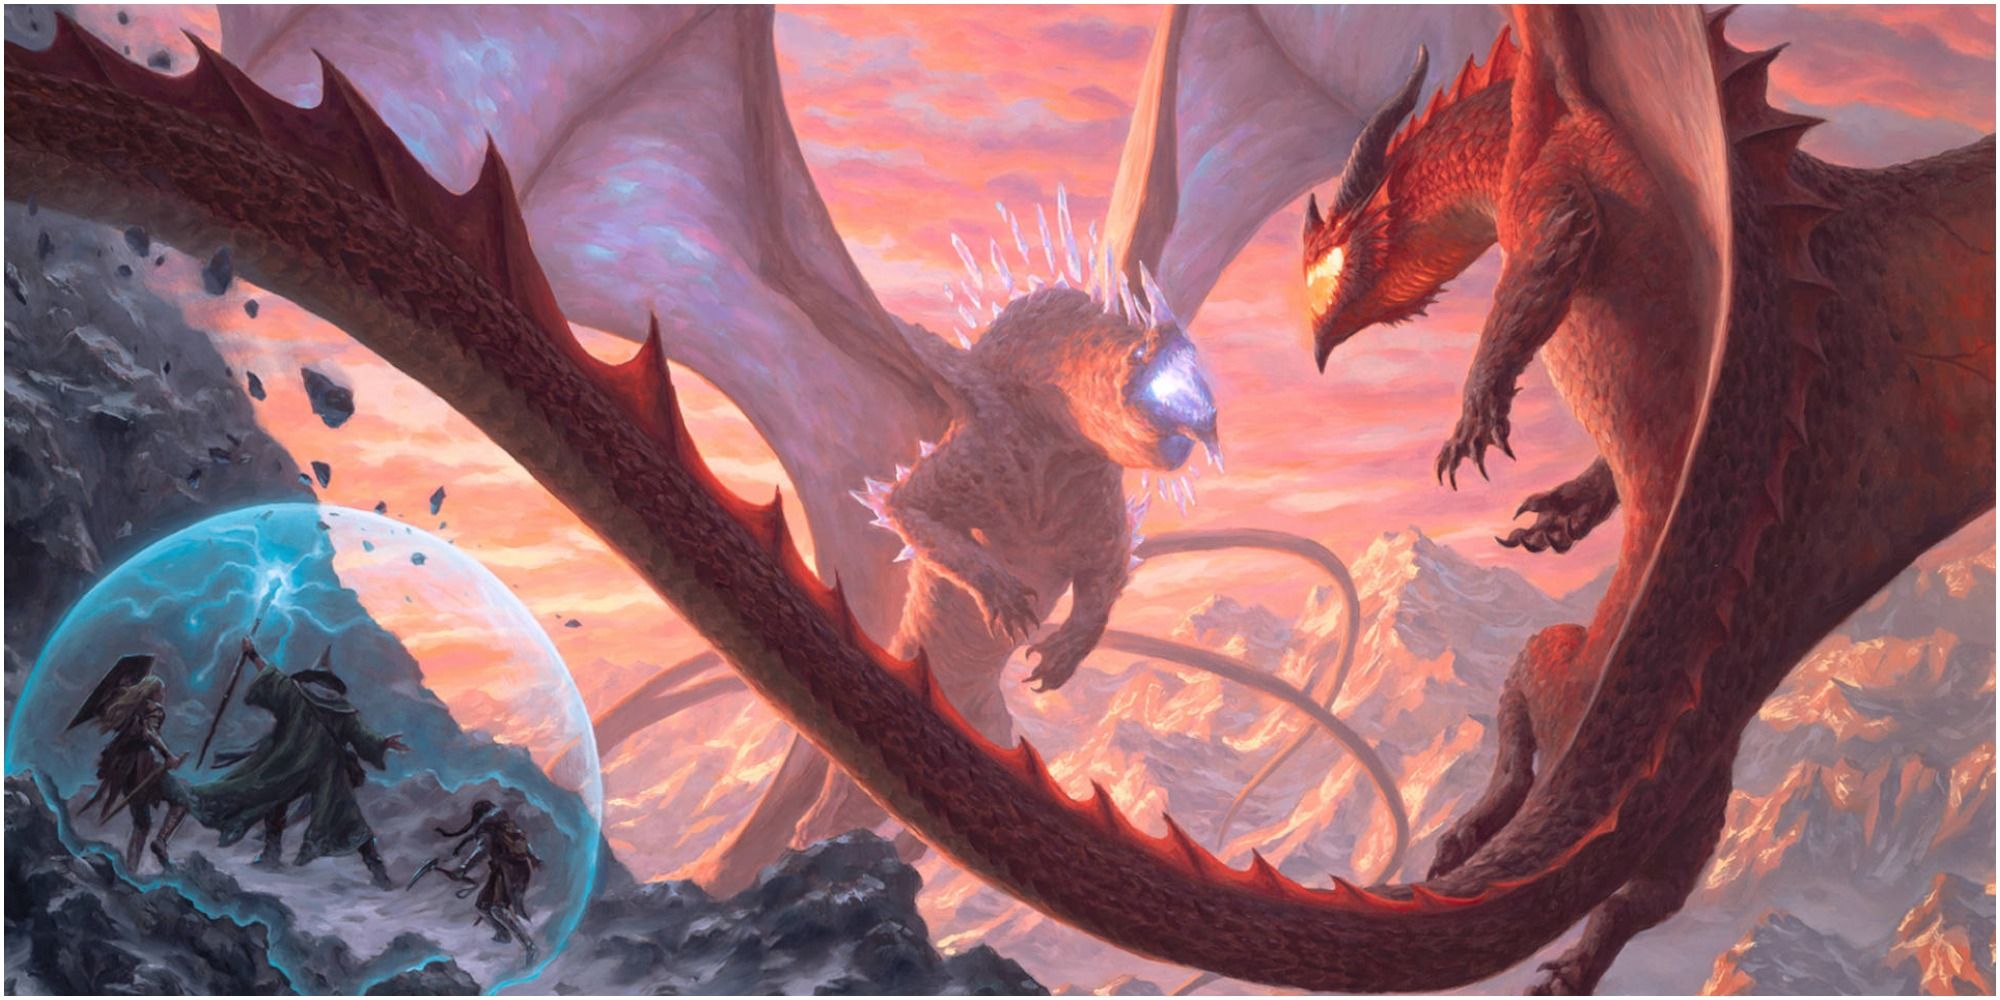 Fizban's Treasury Of Dragons Cover Art with two dragons ready to battle as a party casts a shield around them.